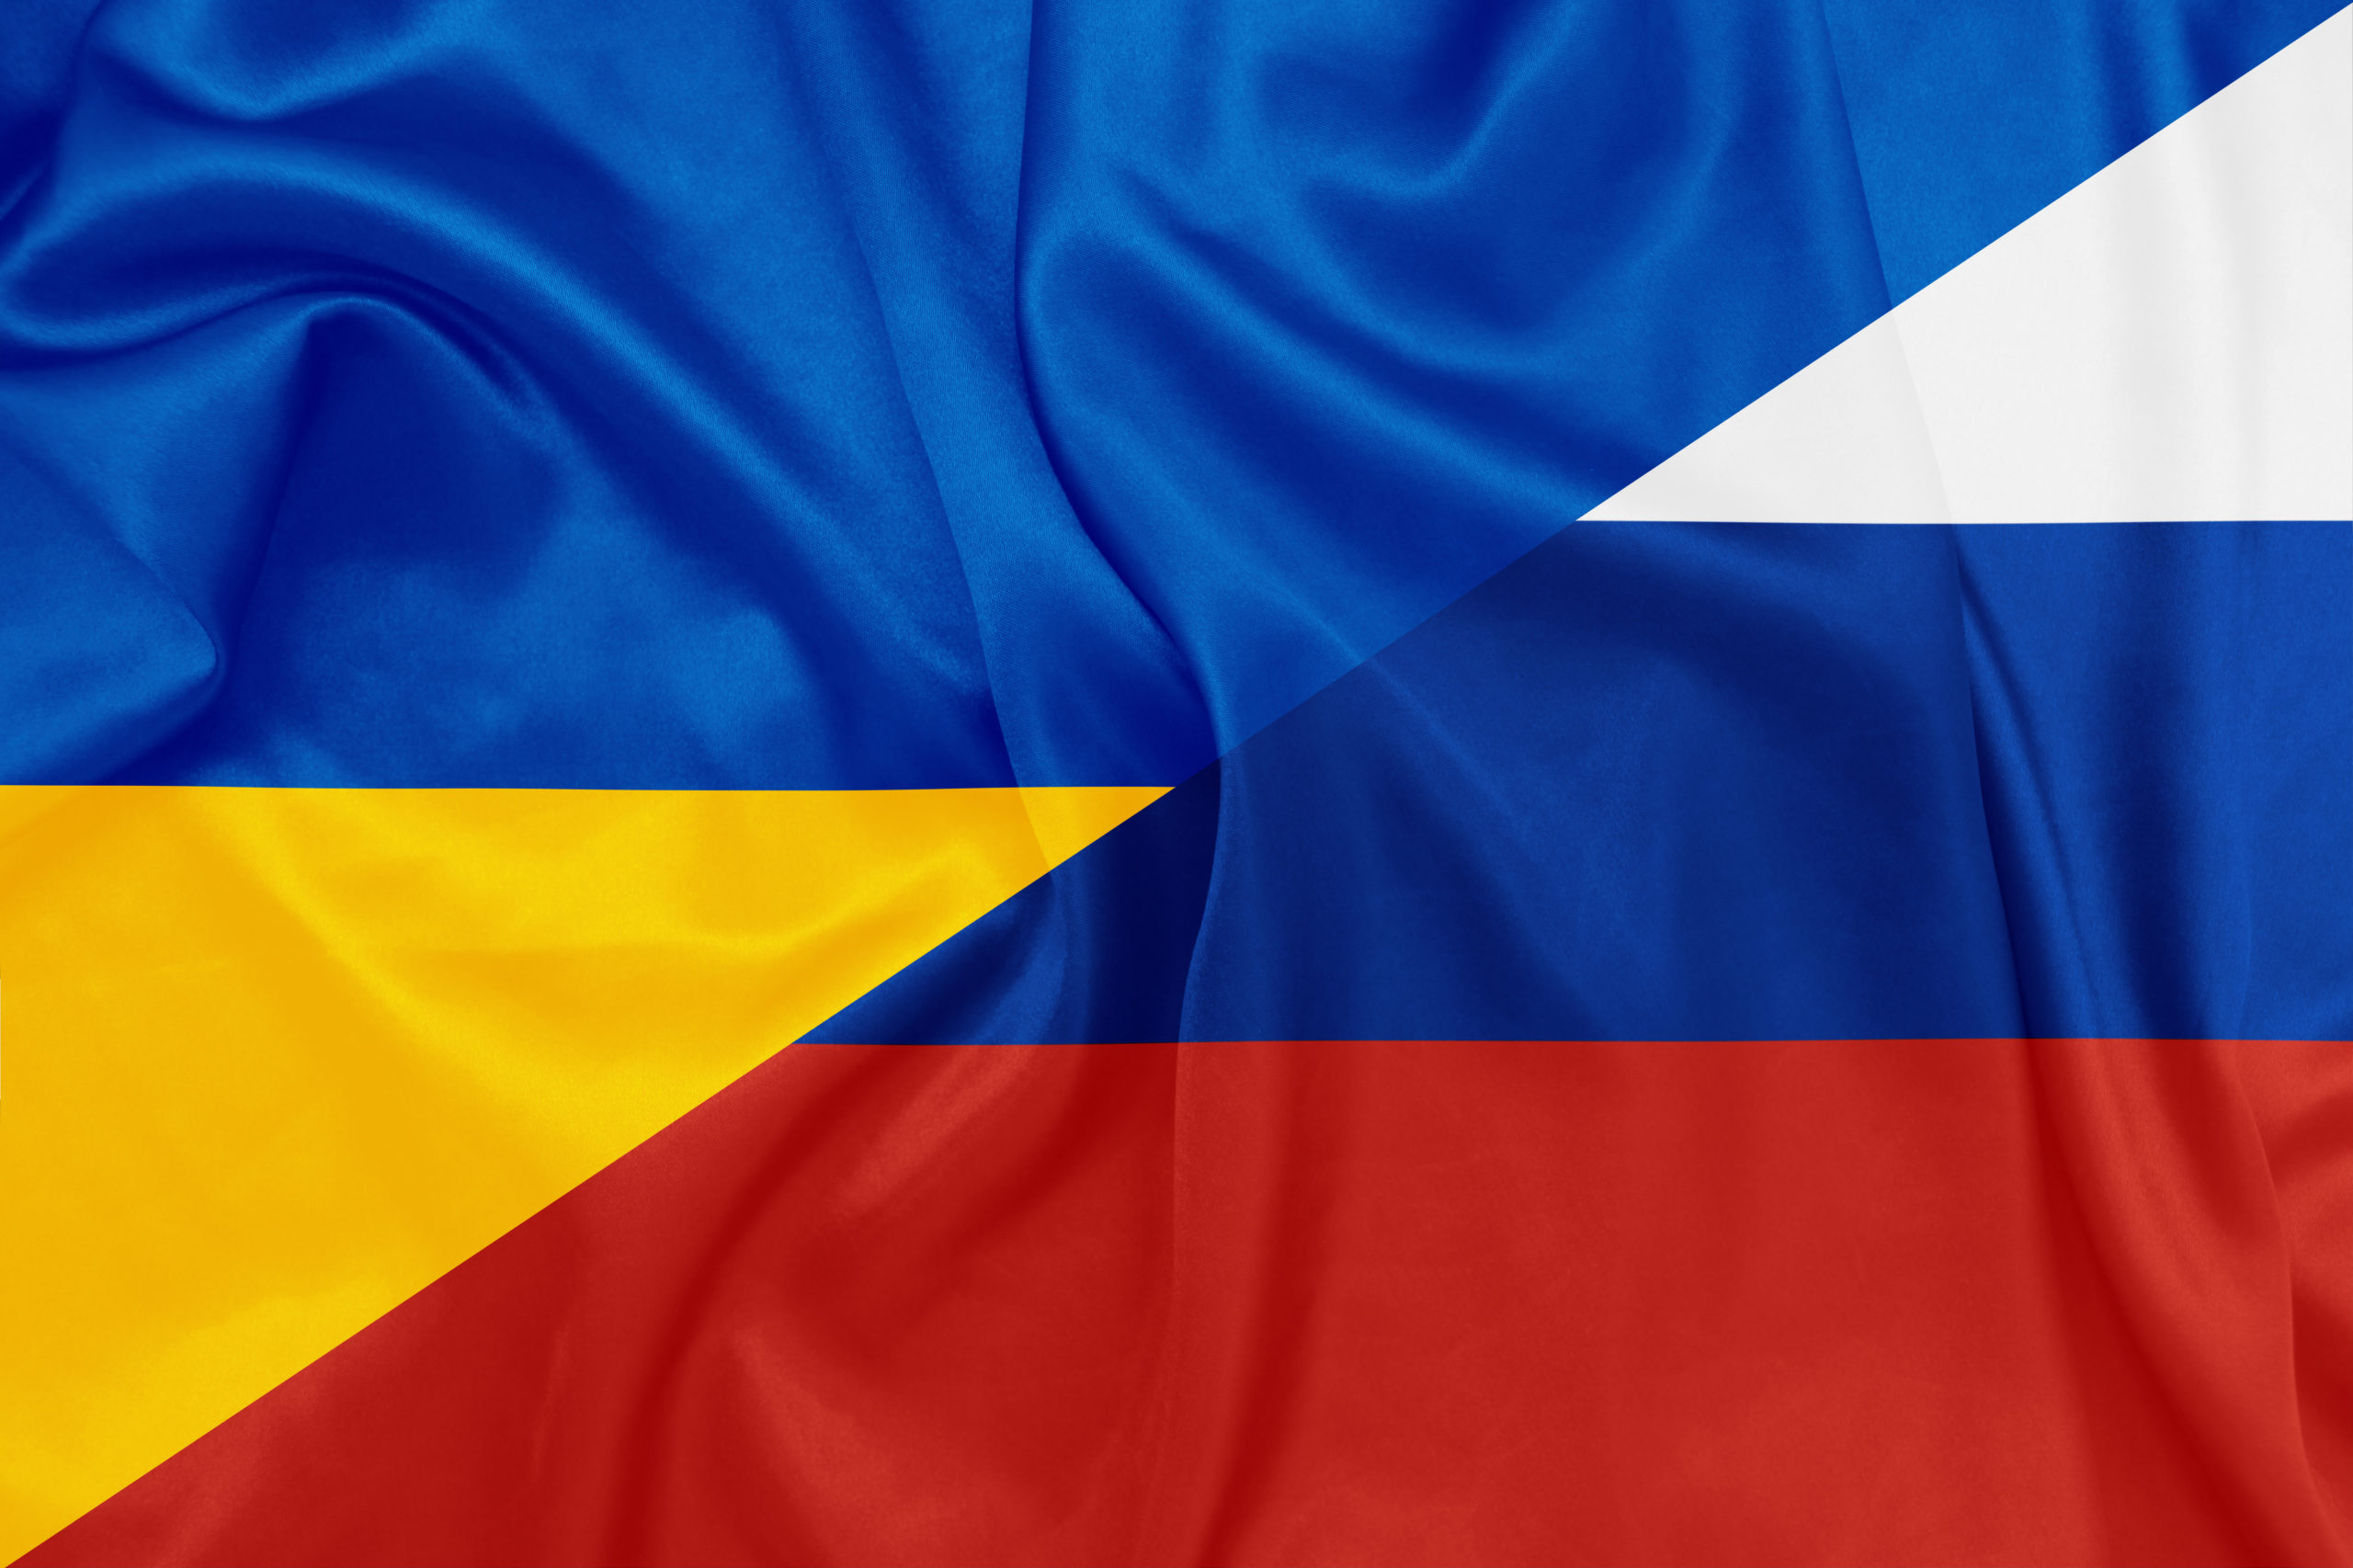 Russia and Ukraine national flags on silk texture